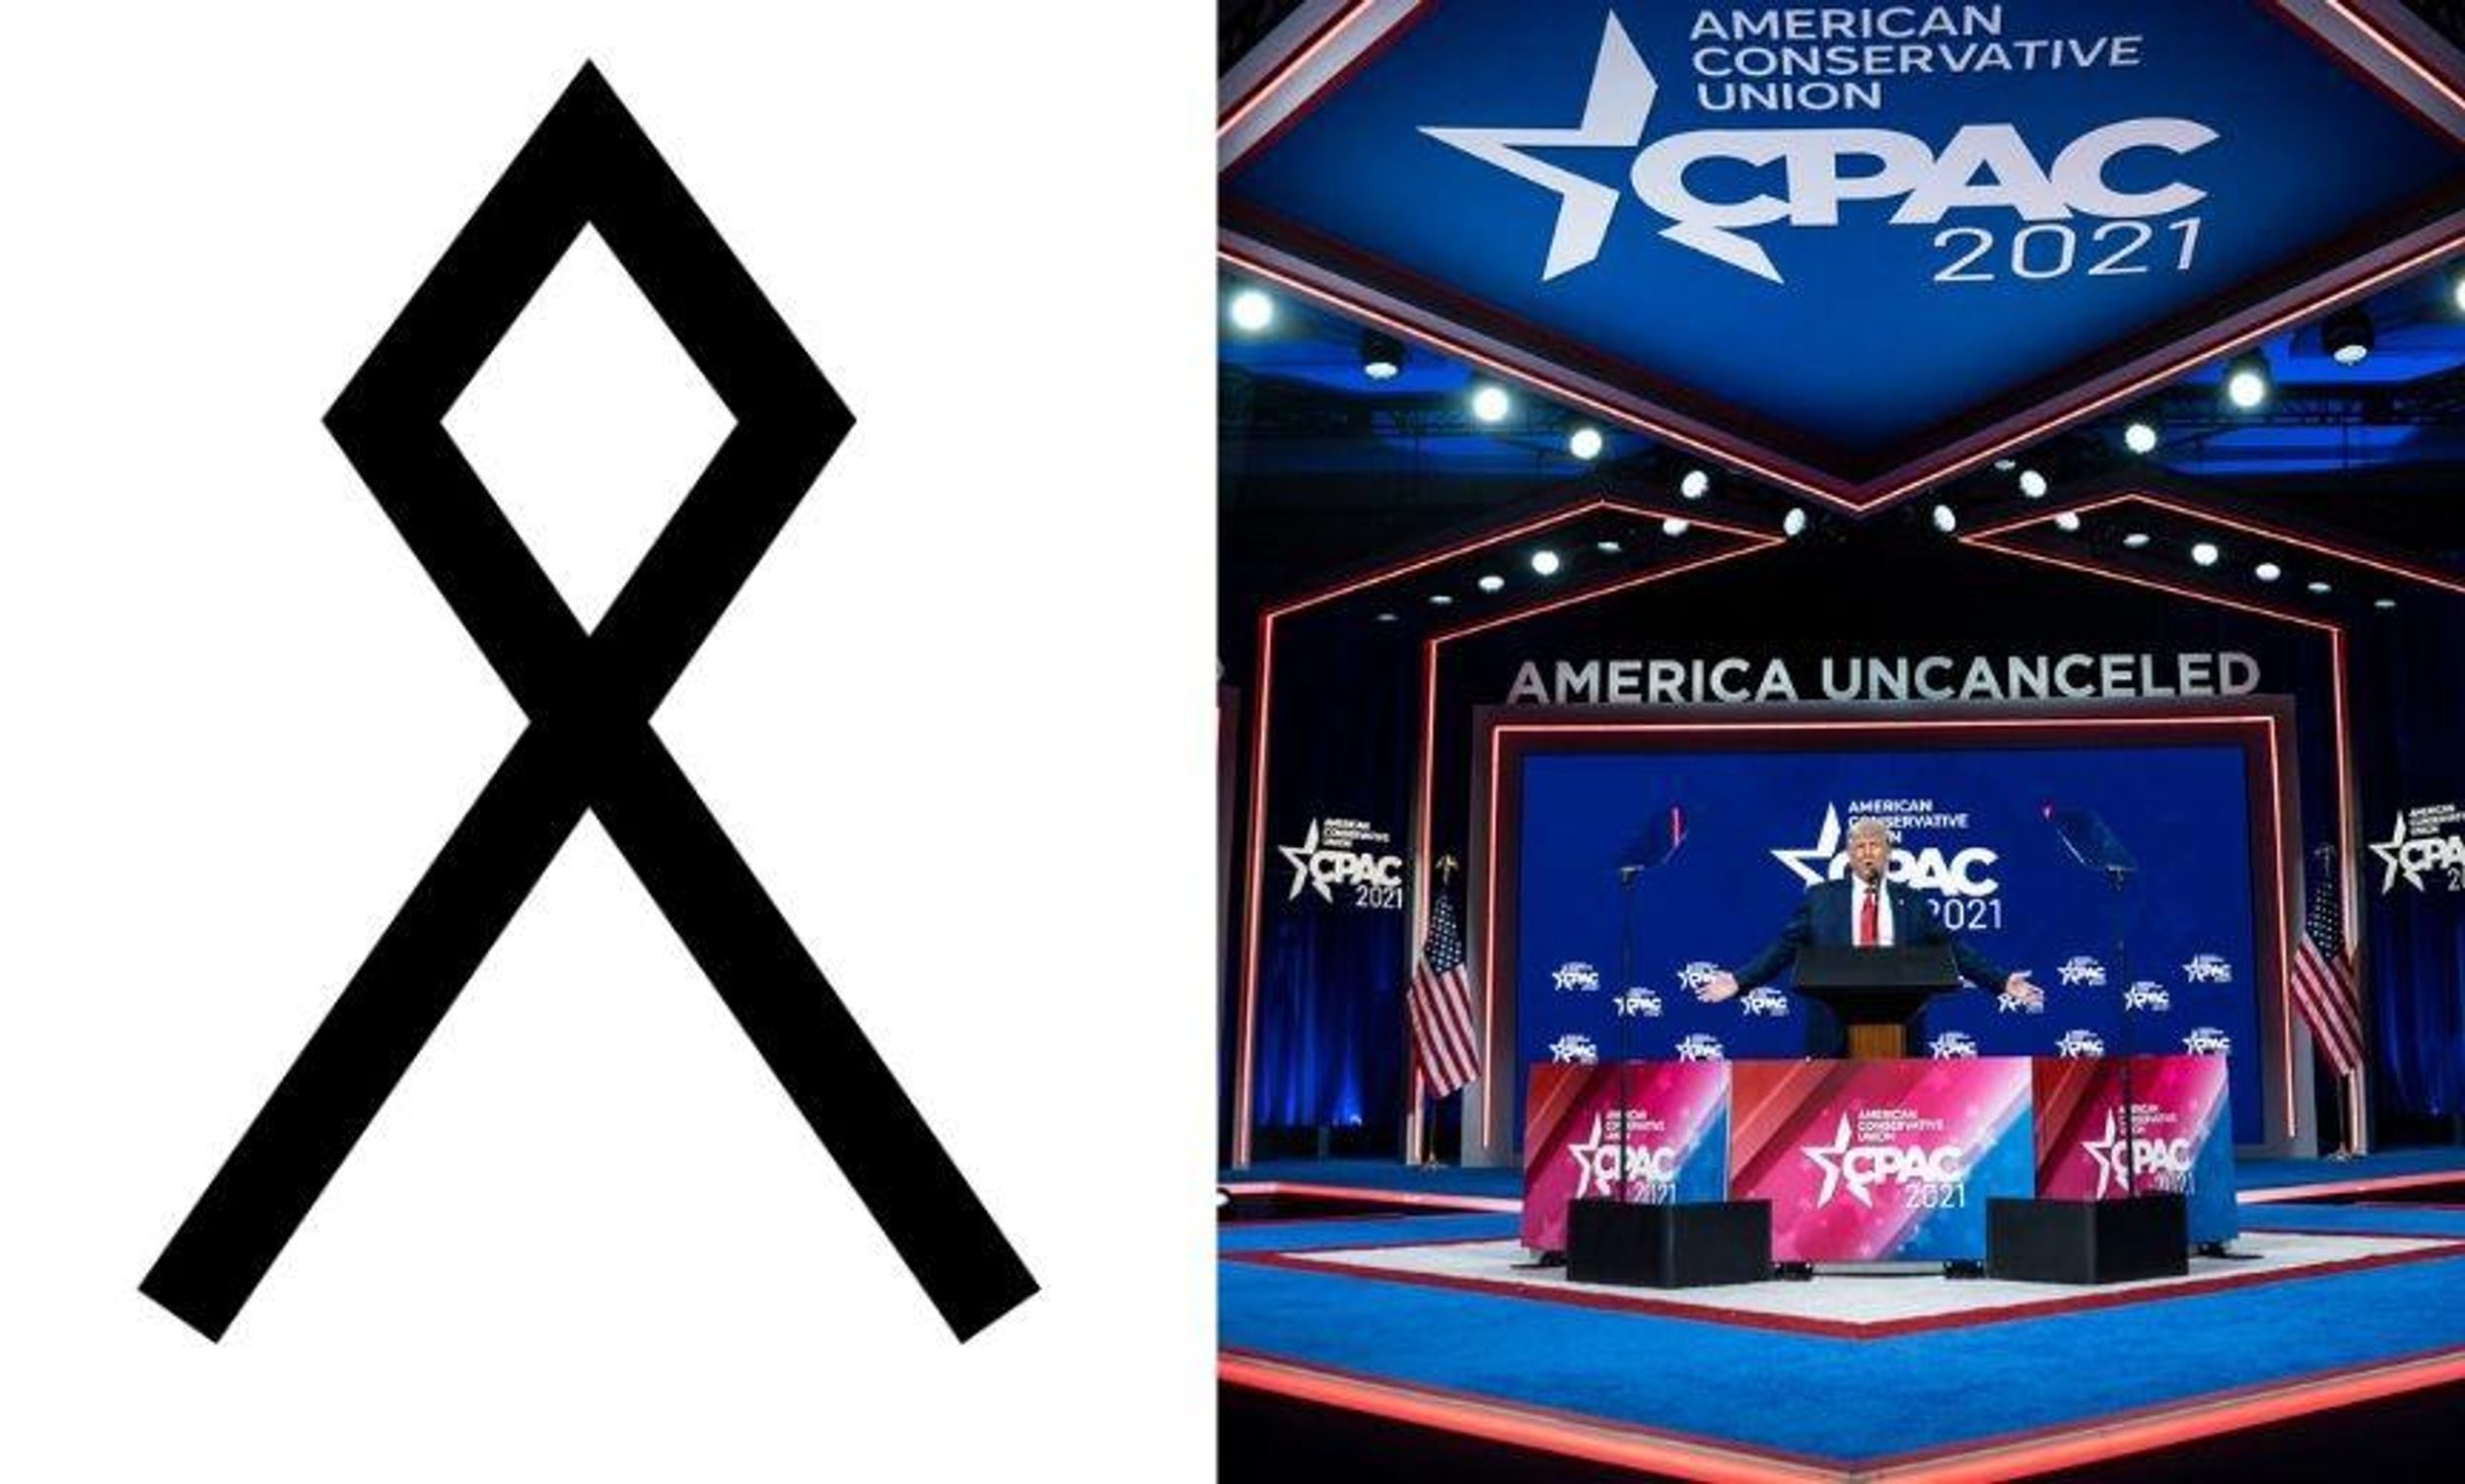 Hyatt Finally Just Responded to Complaints About Nazi Imagery at CPAC—and People Are So Not Having It